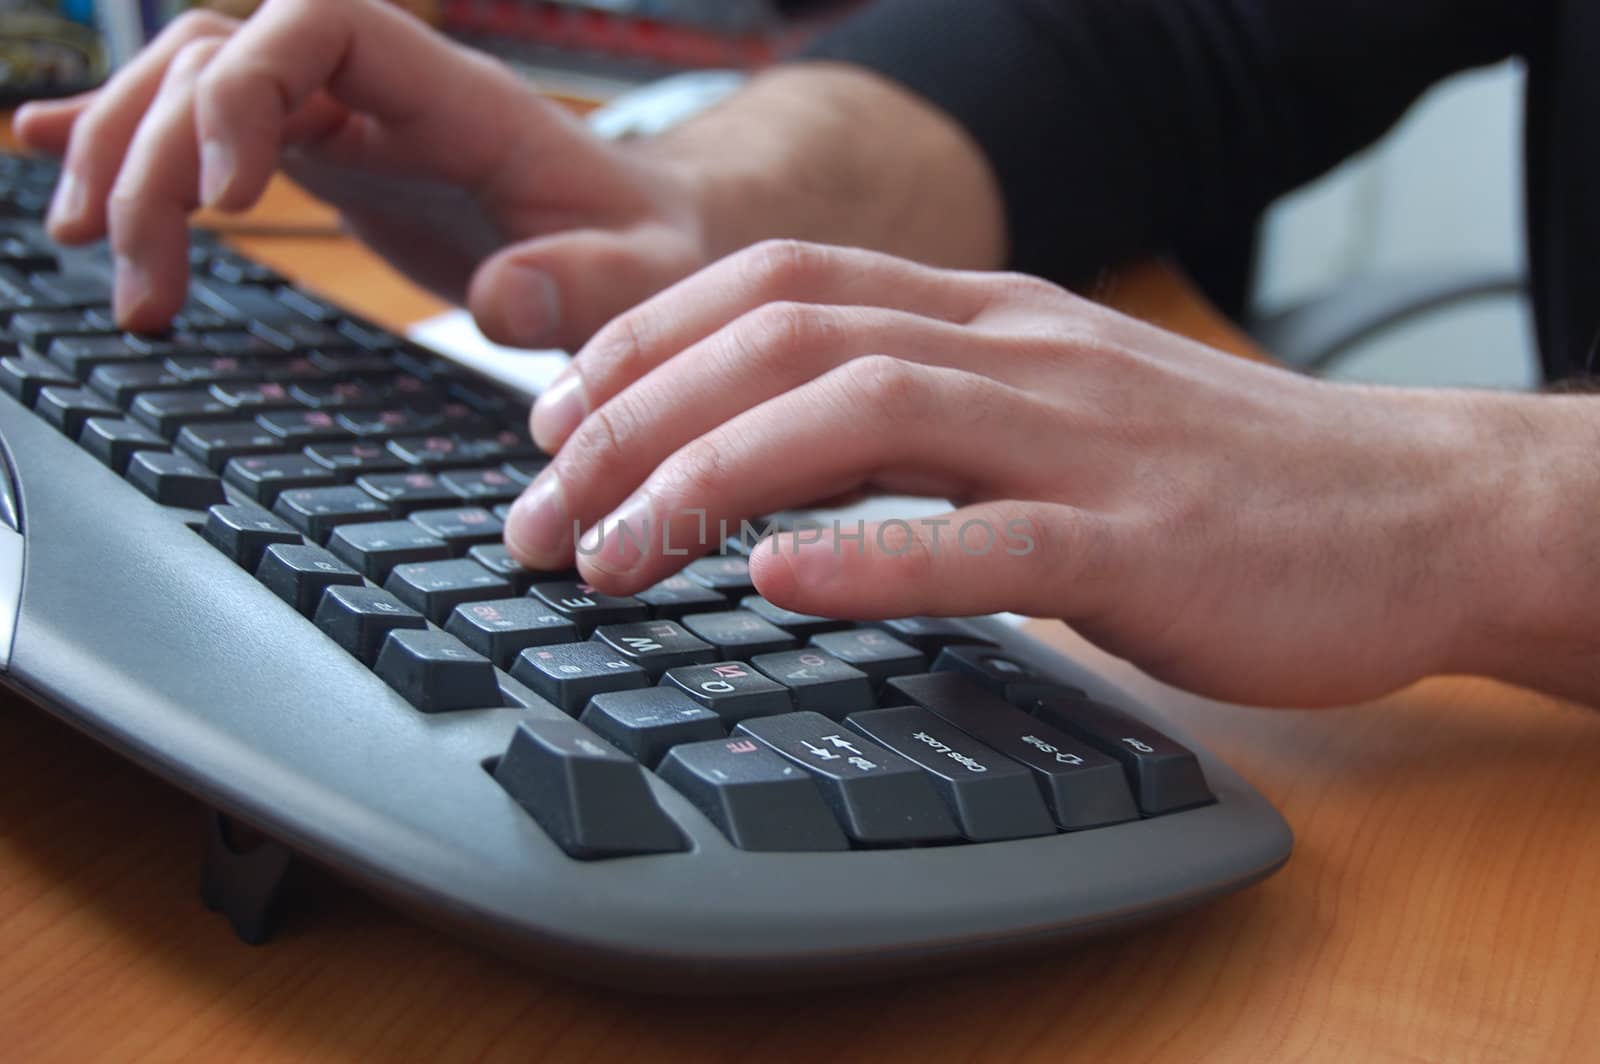 male hand typing on black keyboard